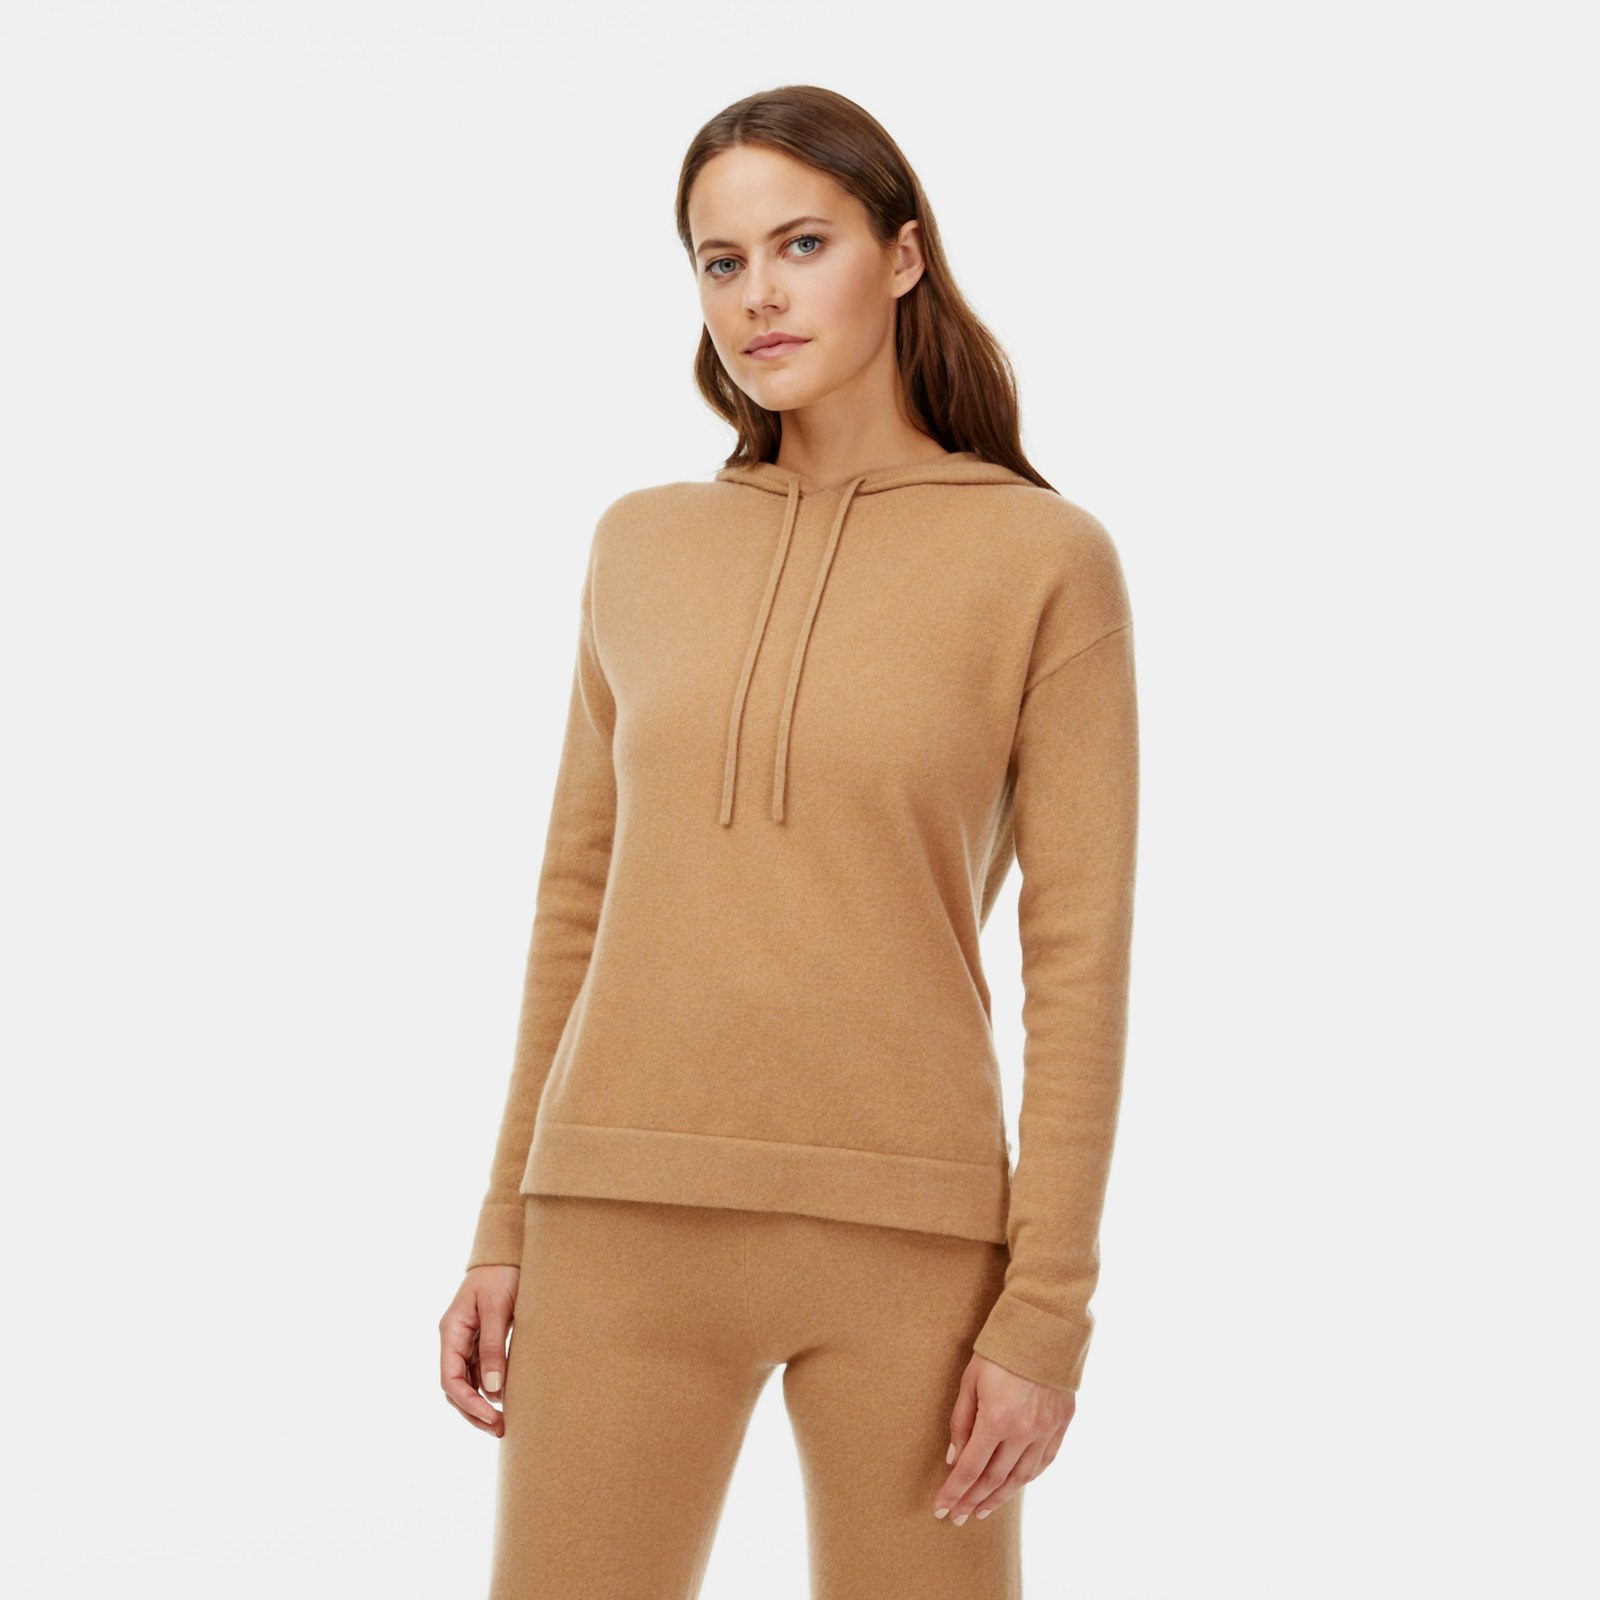 Recycled_Cashmere_Hoodie_Camel_Womens_OnFigure_1x1_1505.jpg